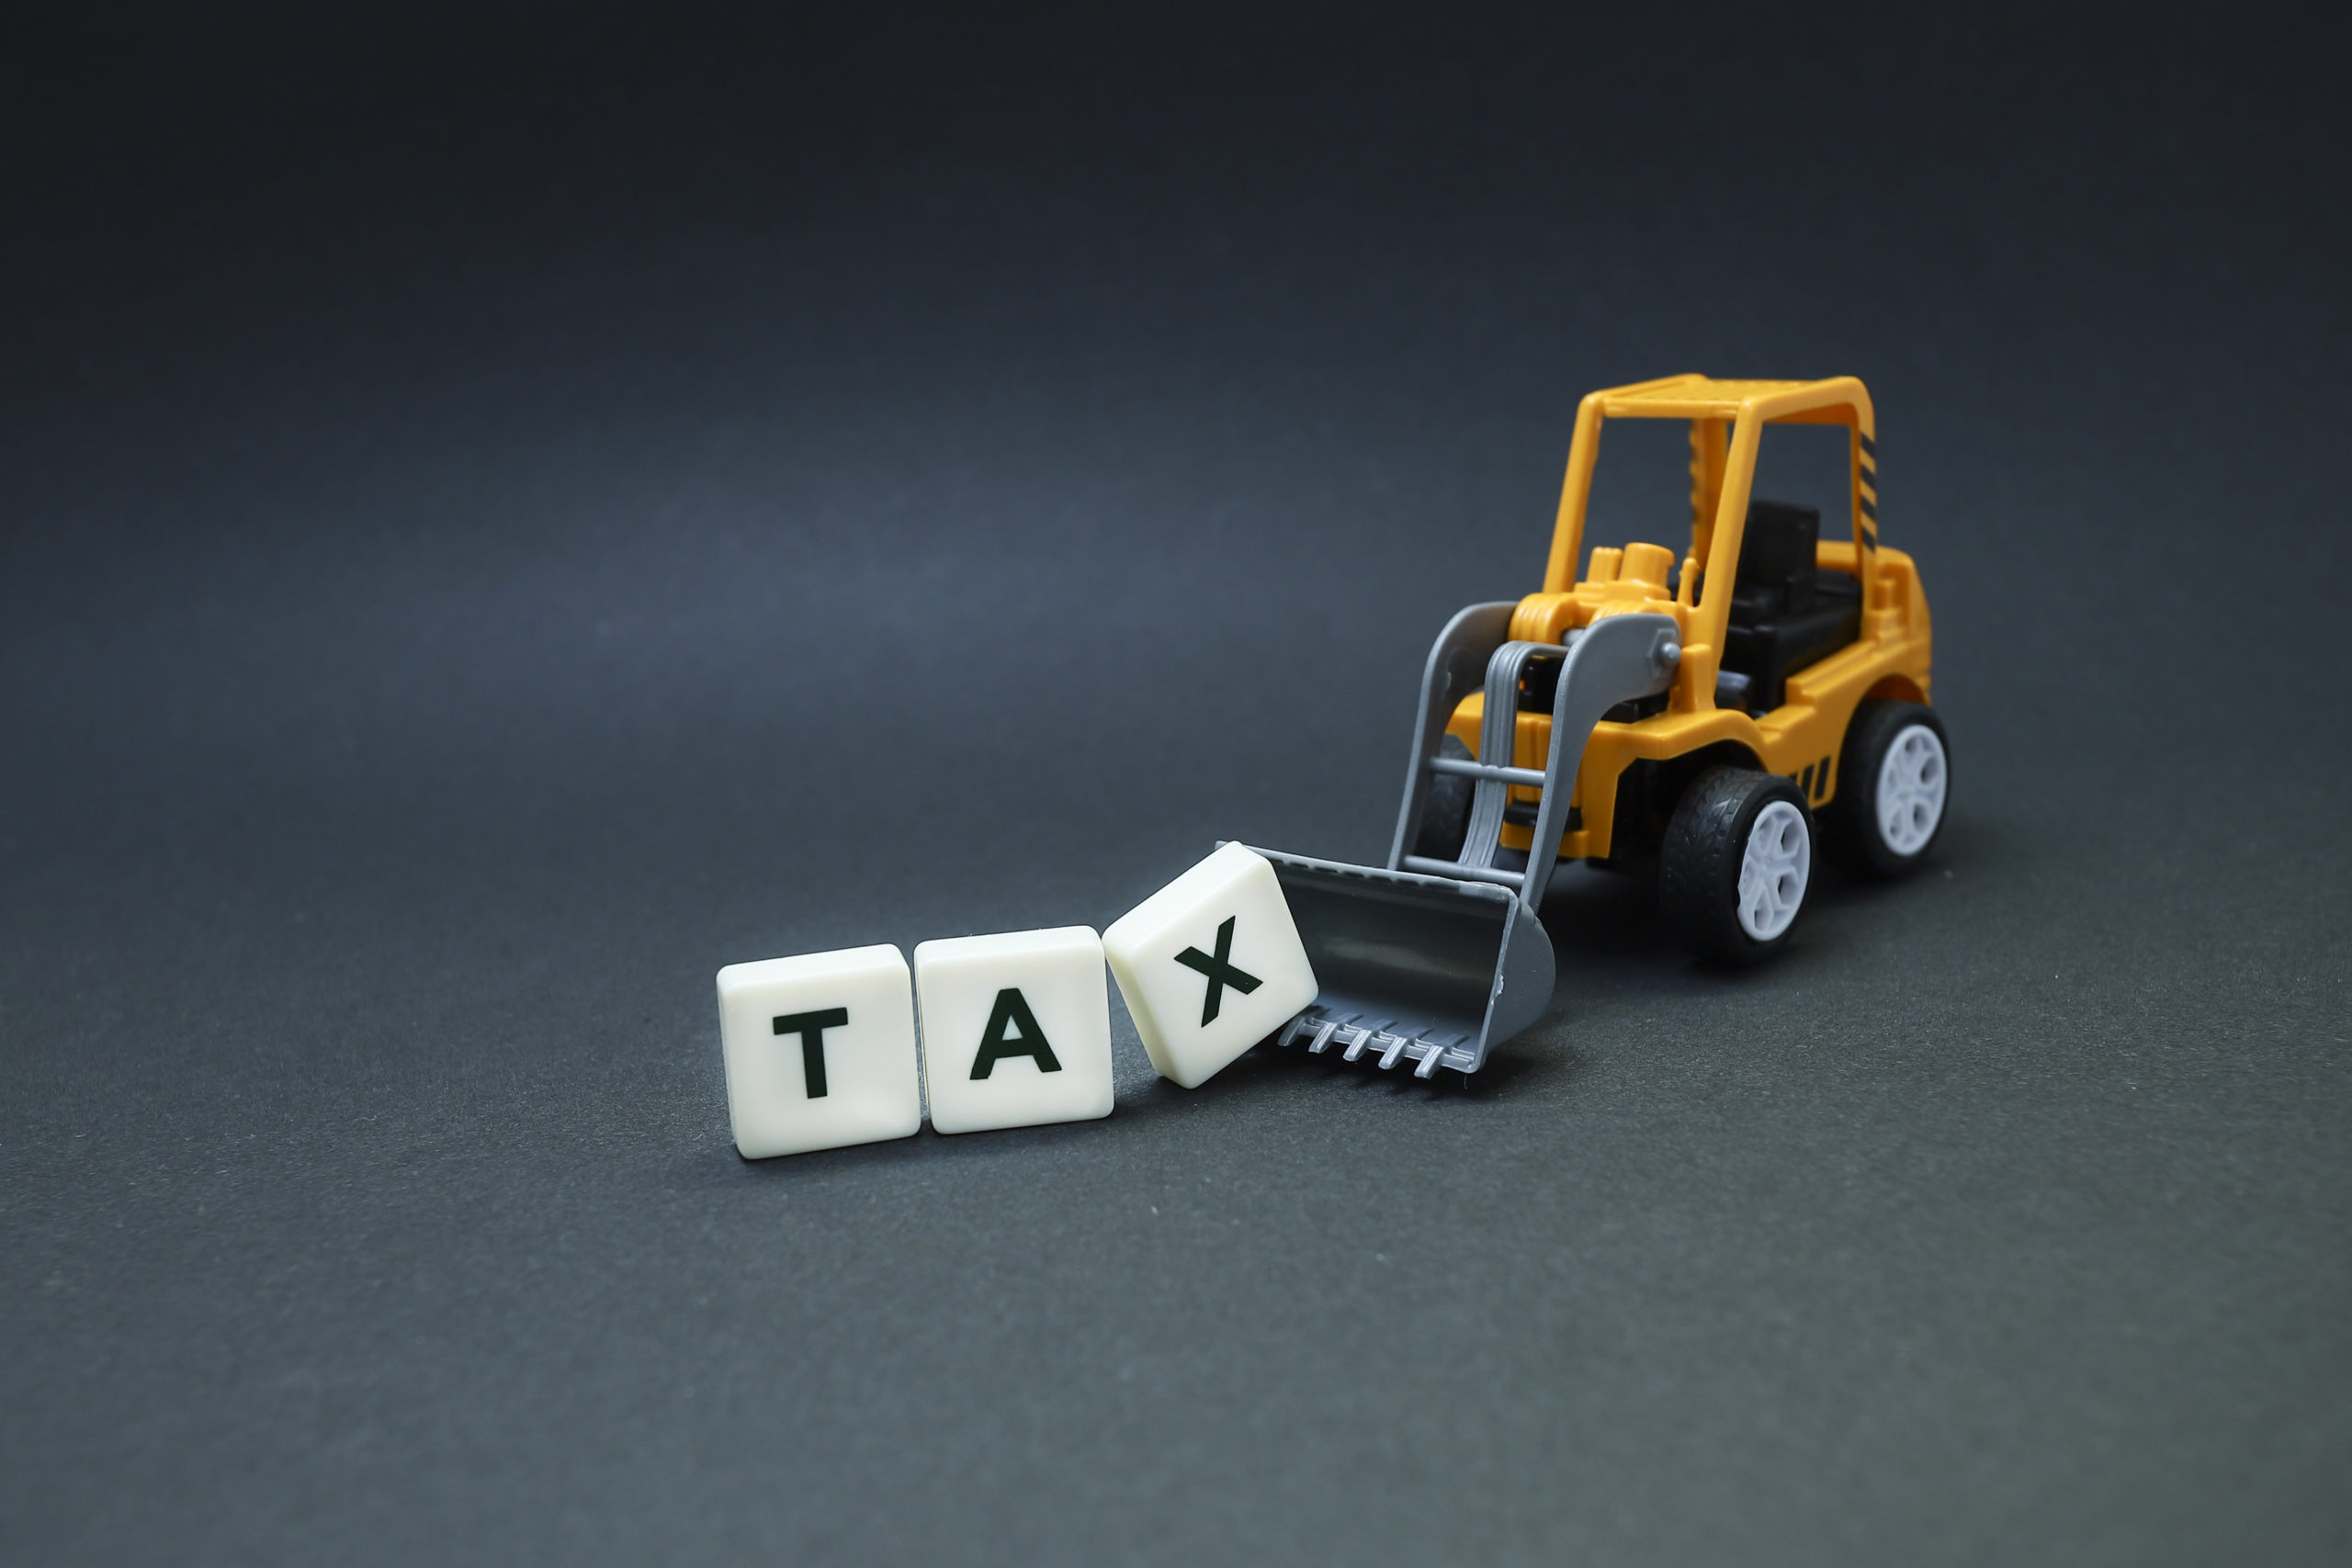 A macro photo of letter blocks spelling "TAX" being lifted by a bulldozer